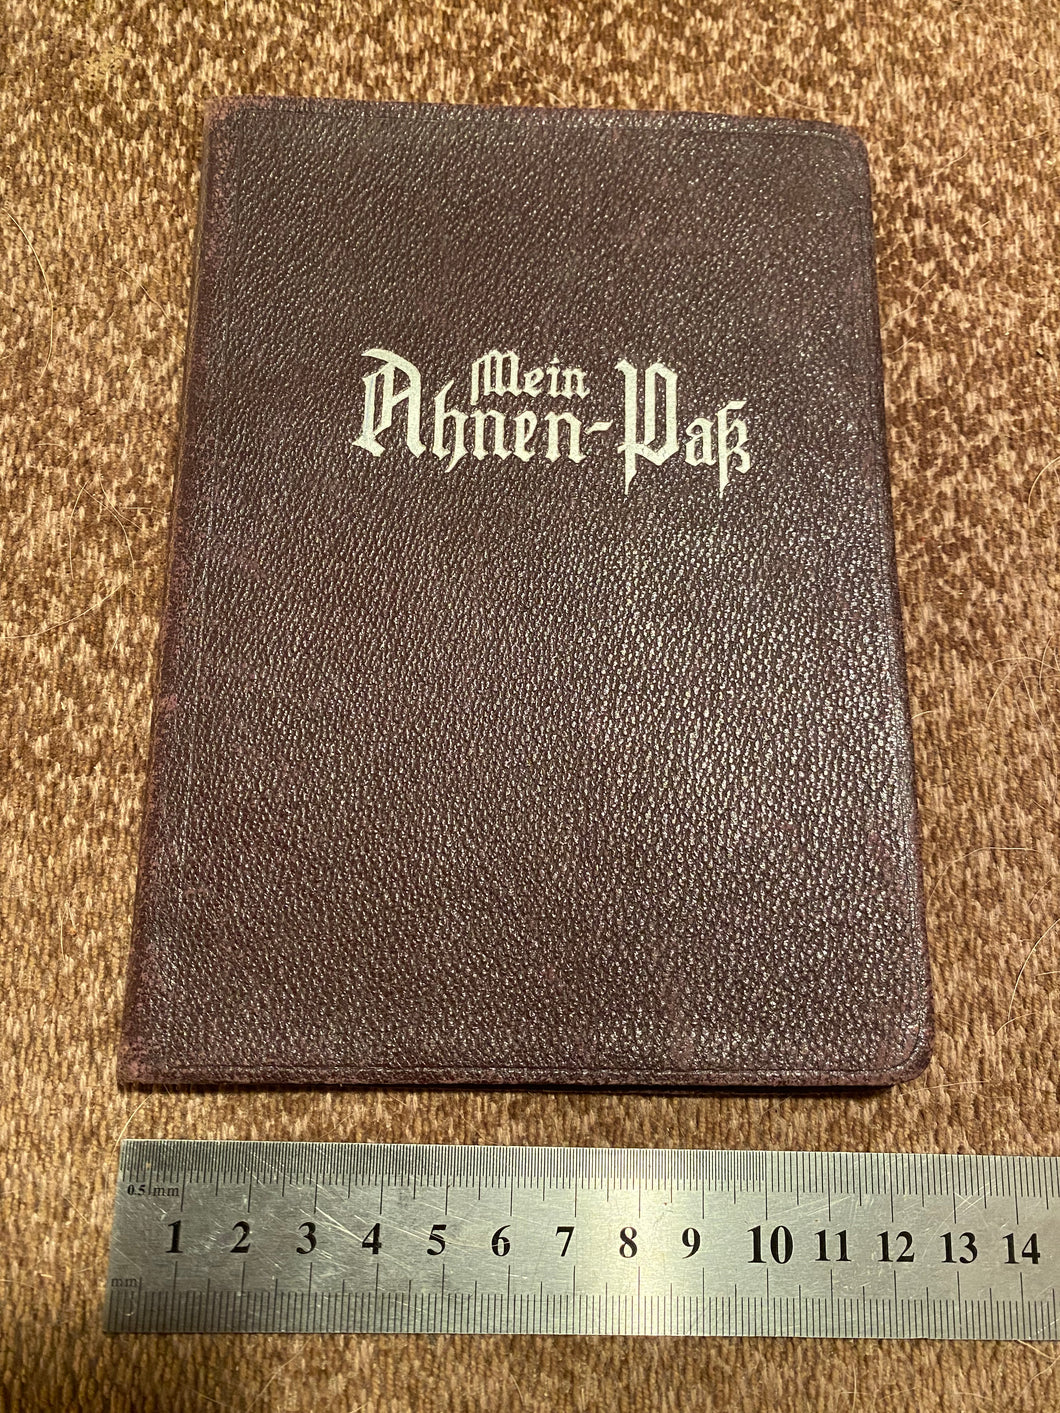 Third Reich Ahnen Pass (Family Tree Book) in good condition. With stamps and information.